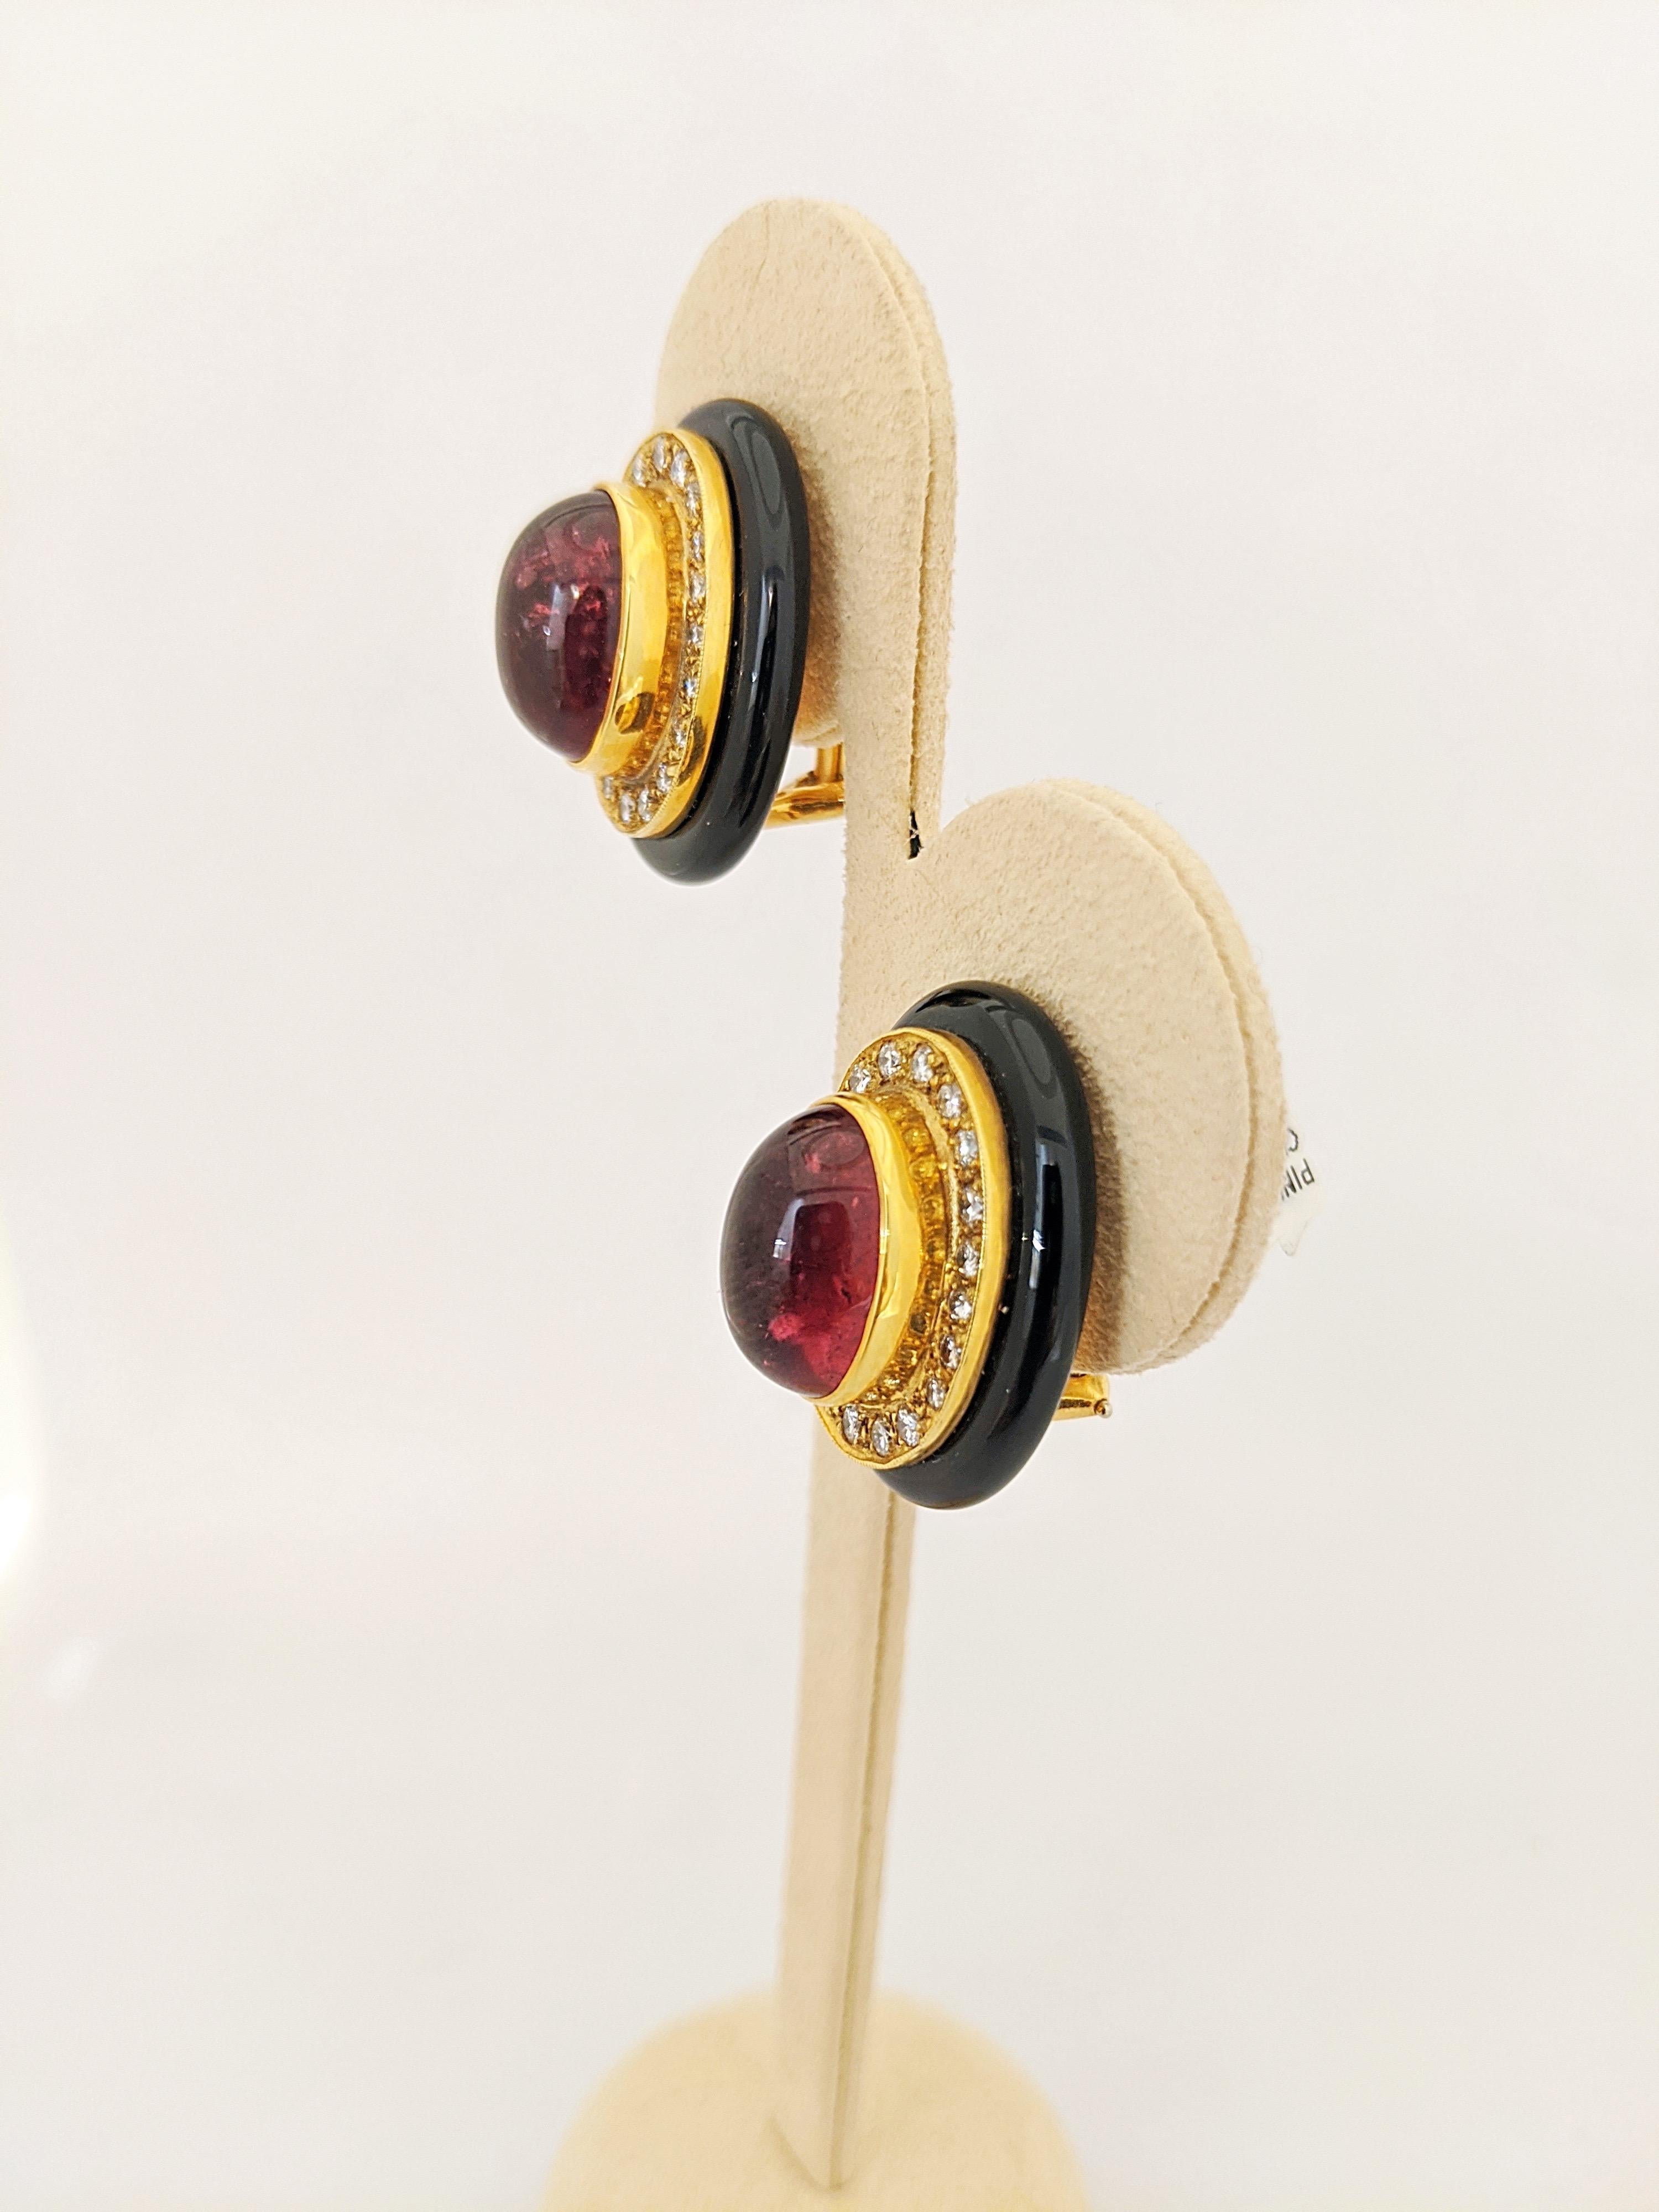 Crafted by Lagos, These 18KT yellow gold earrings  center a bezel set oval cabochon Pink Tourmaline. There are 20 round brilliant Diamonds surrounding the center Tourmaline in each earring and a ring of Black Onyx surrounding the Diamonds. The